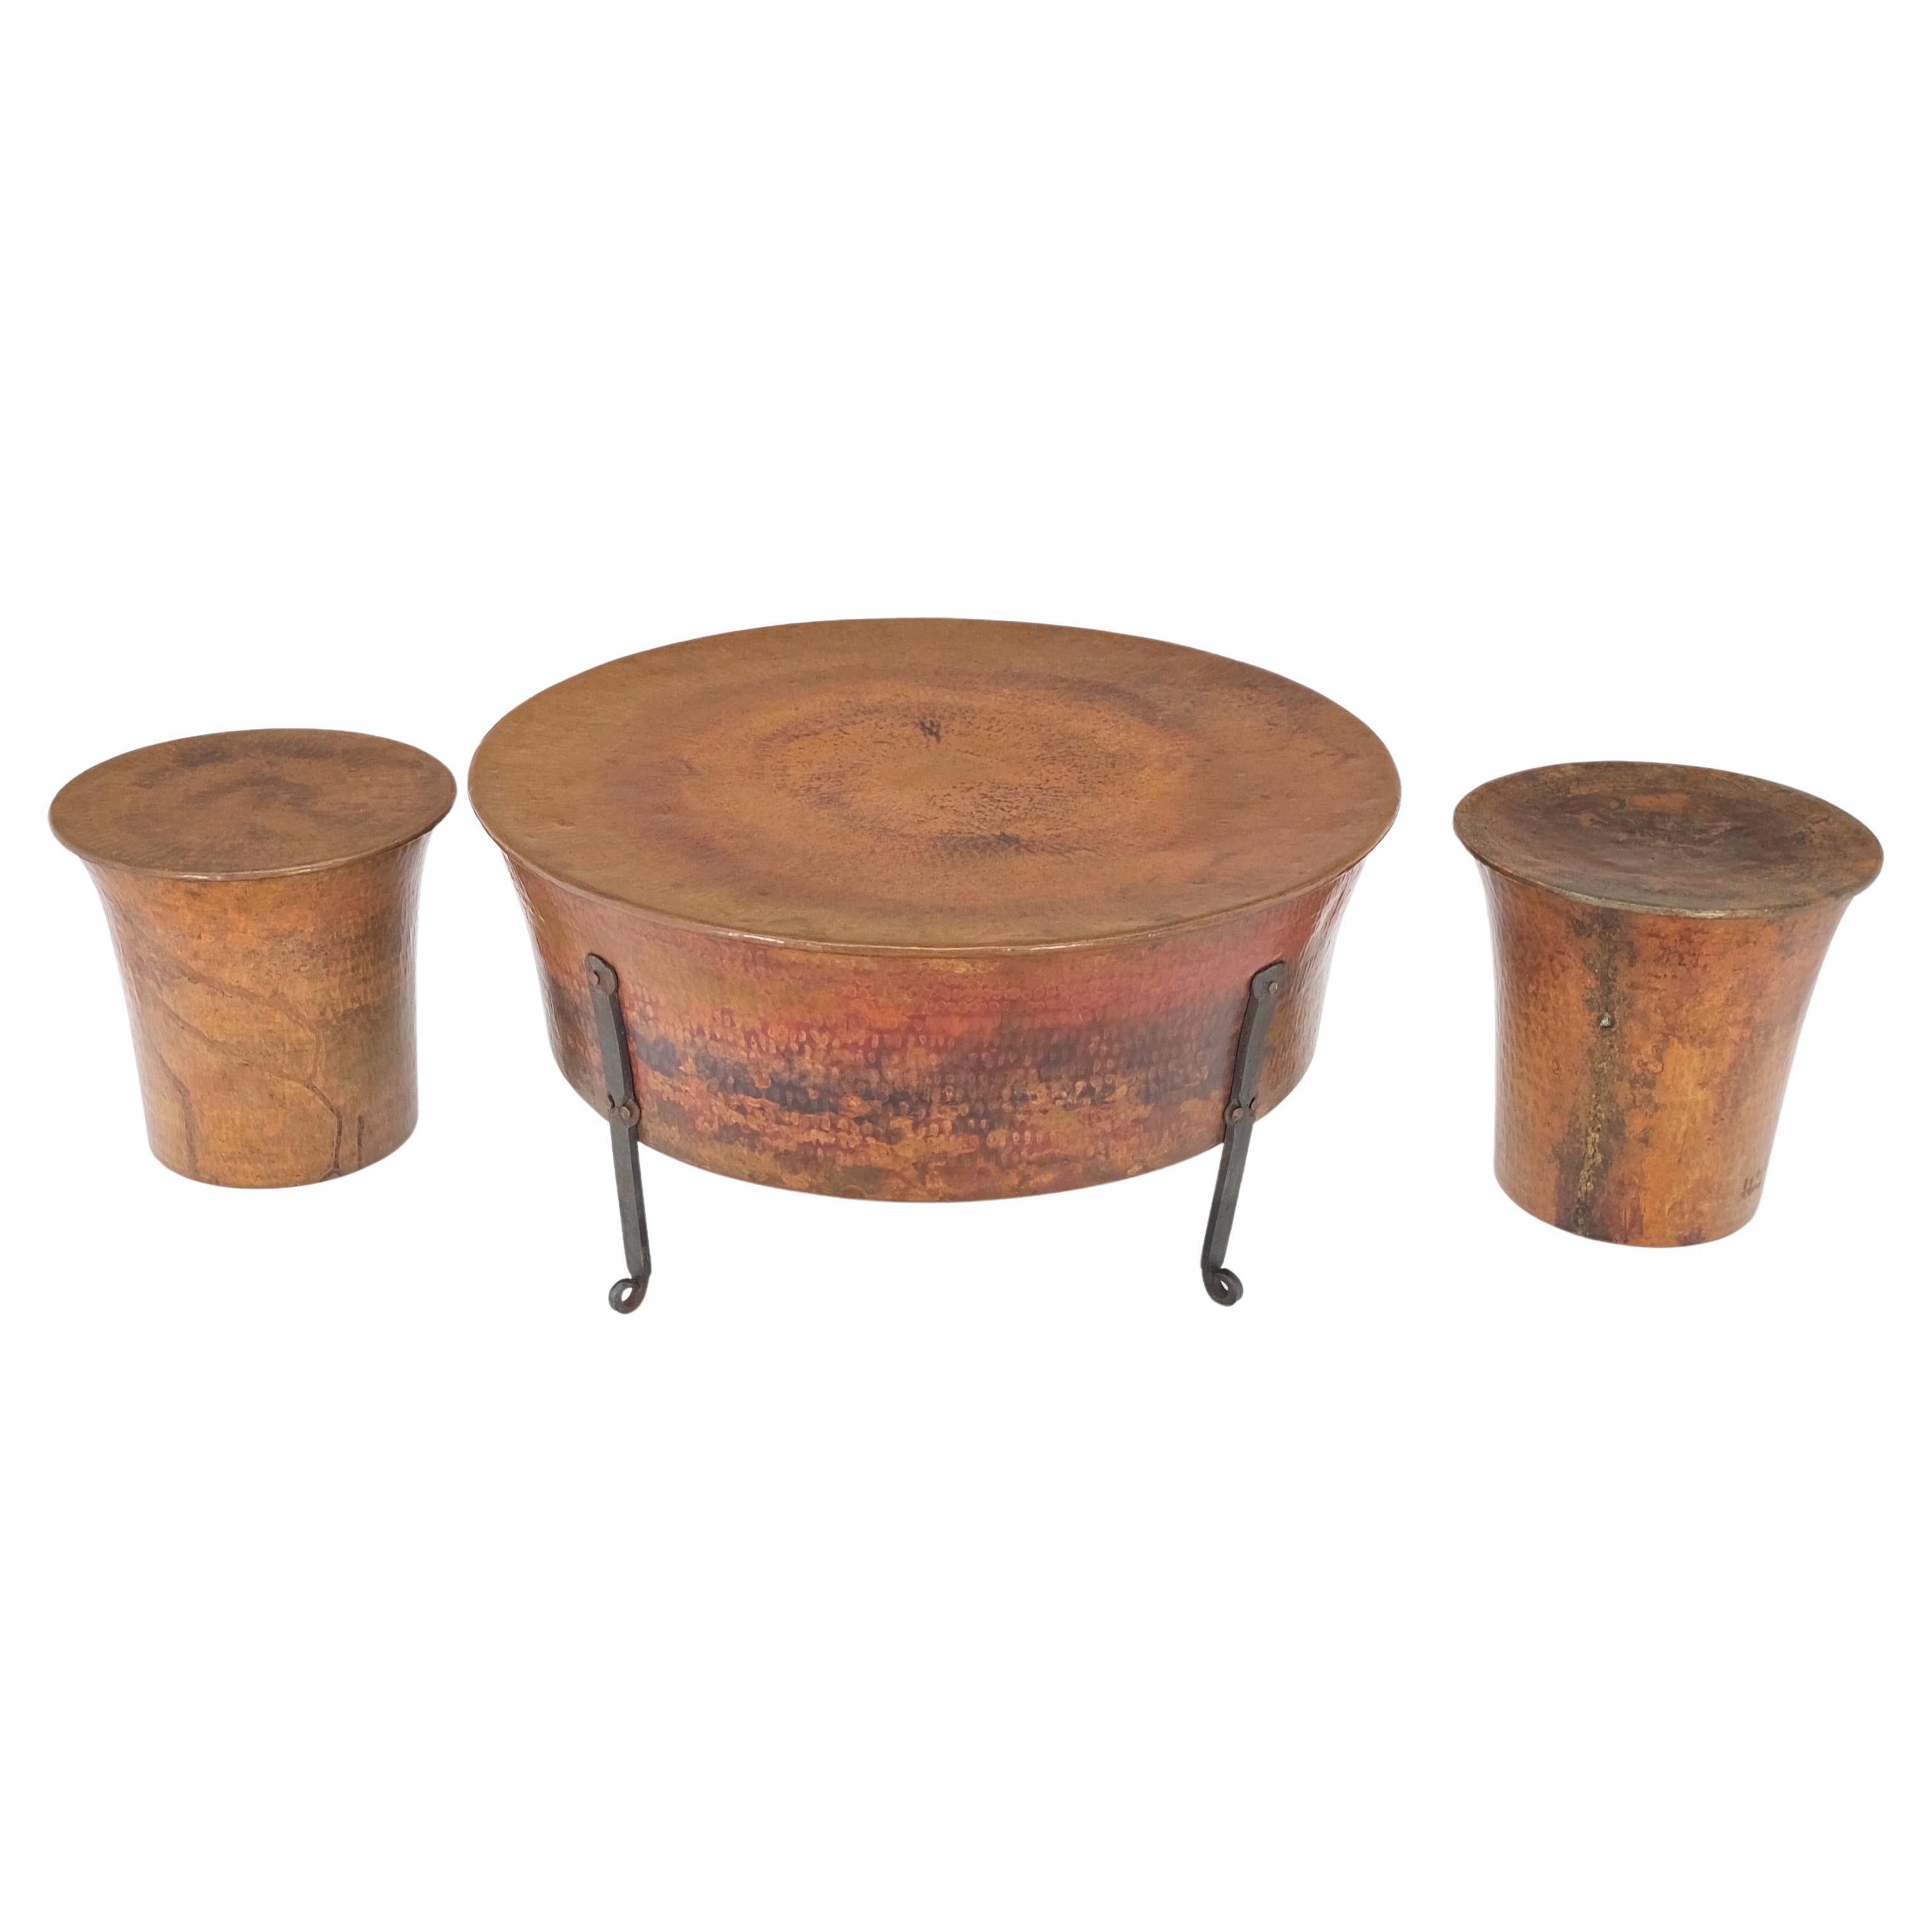 Vintage Hummered Forged Copper & Iron Round Coffee Table & Pair of Stools Seats